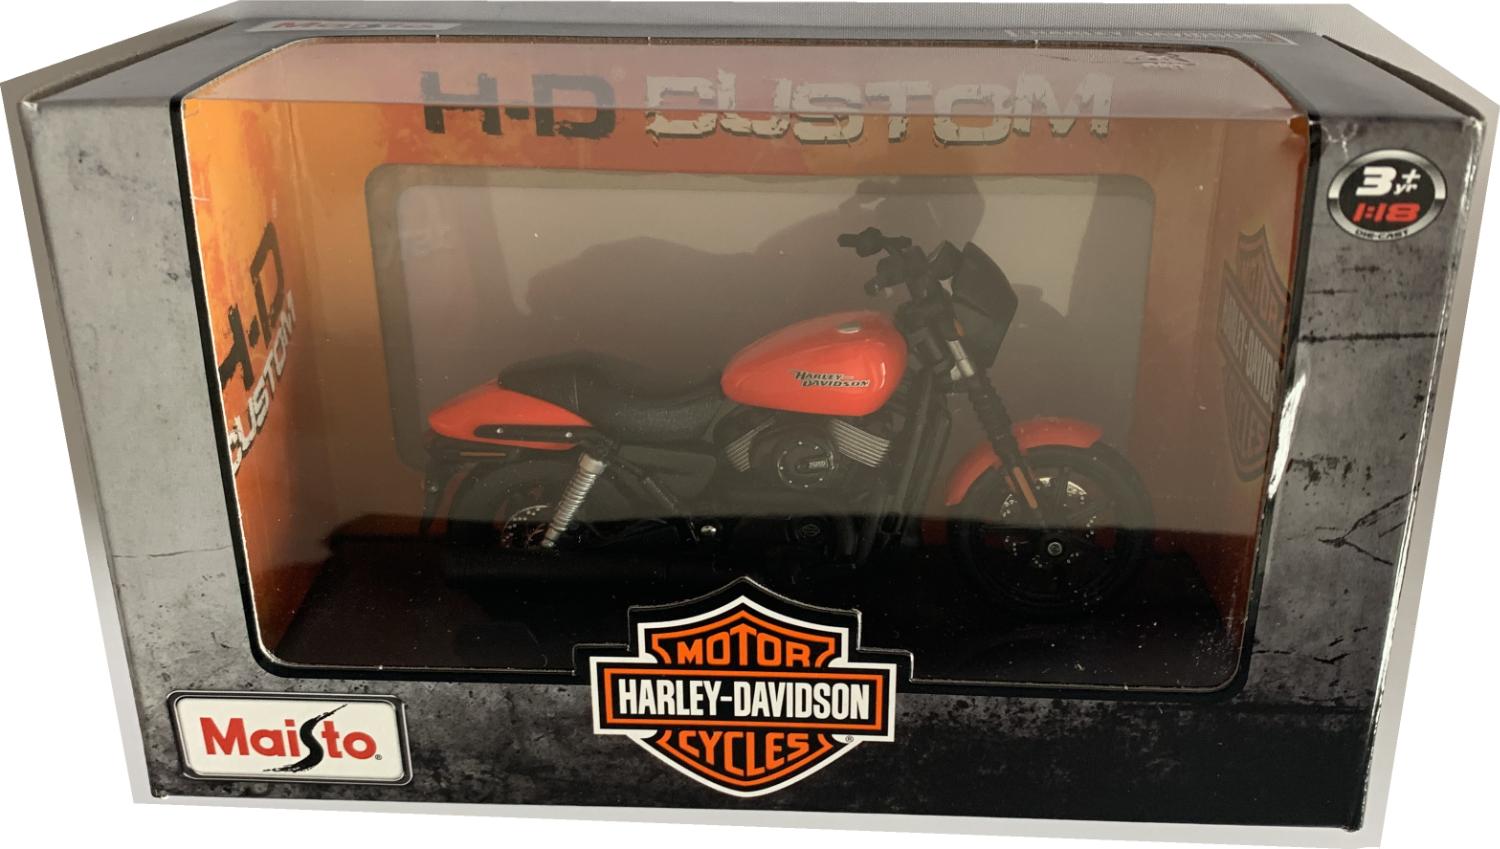 Model is mounted on a removable plinth and presented in a Harley Davidson themed window display box